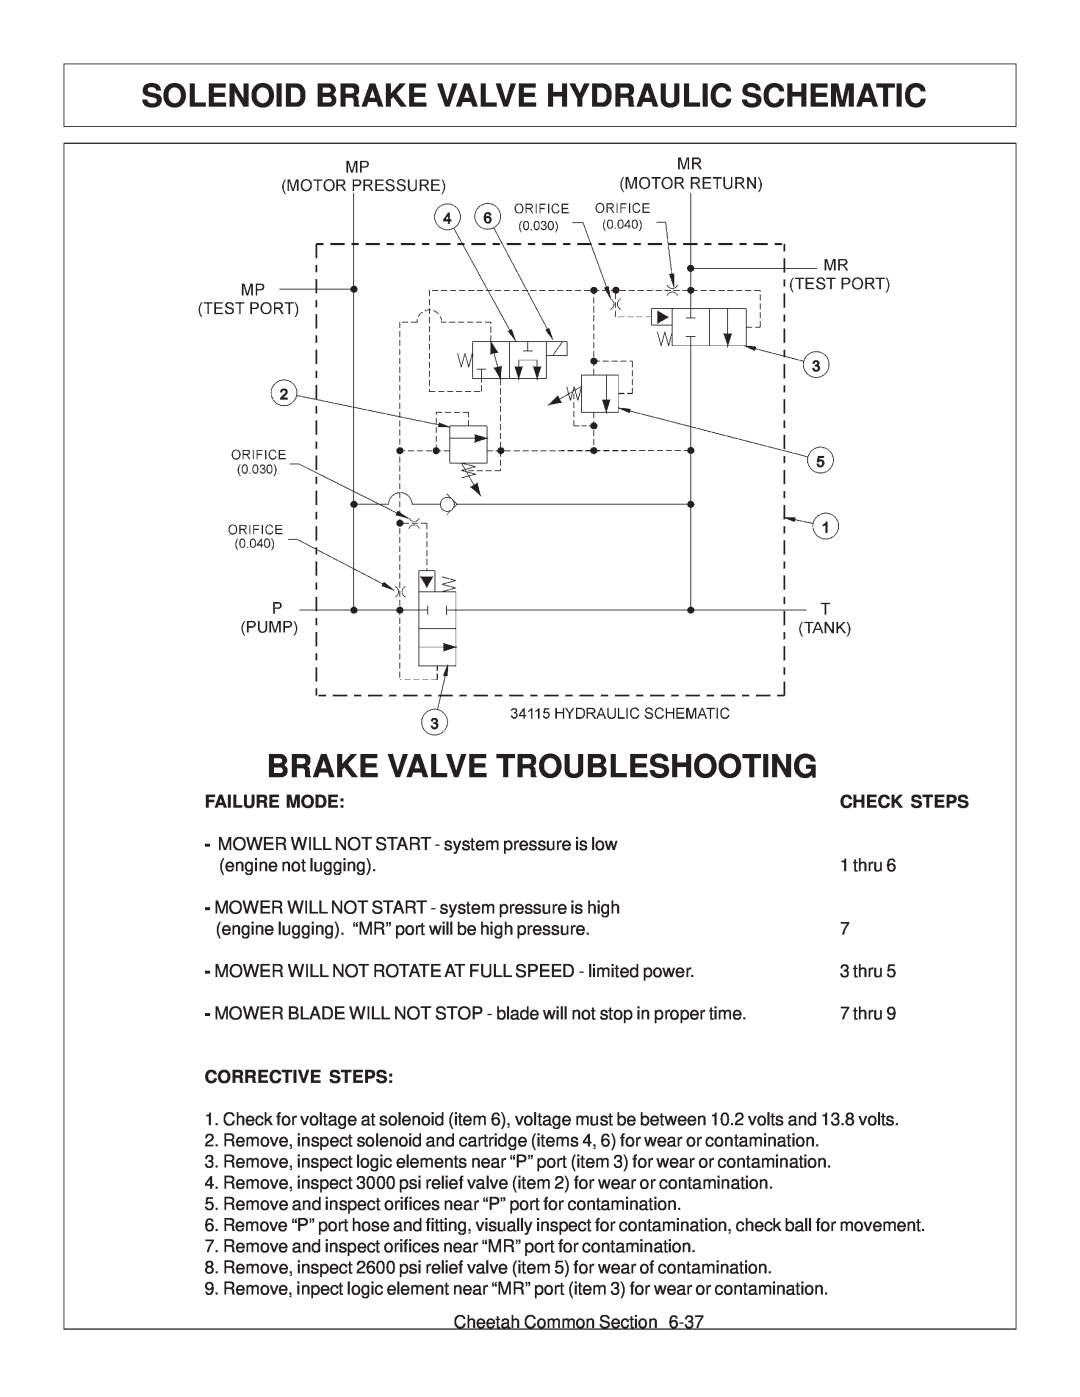 Tiger Products Co., Ltd JD 5101E manual Solenoid Brake Valve Hydraulic Schematic, Brake Valve Troubleshooting, Failure Mode 